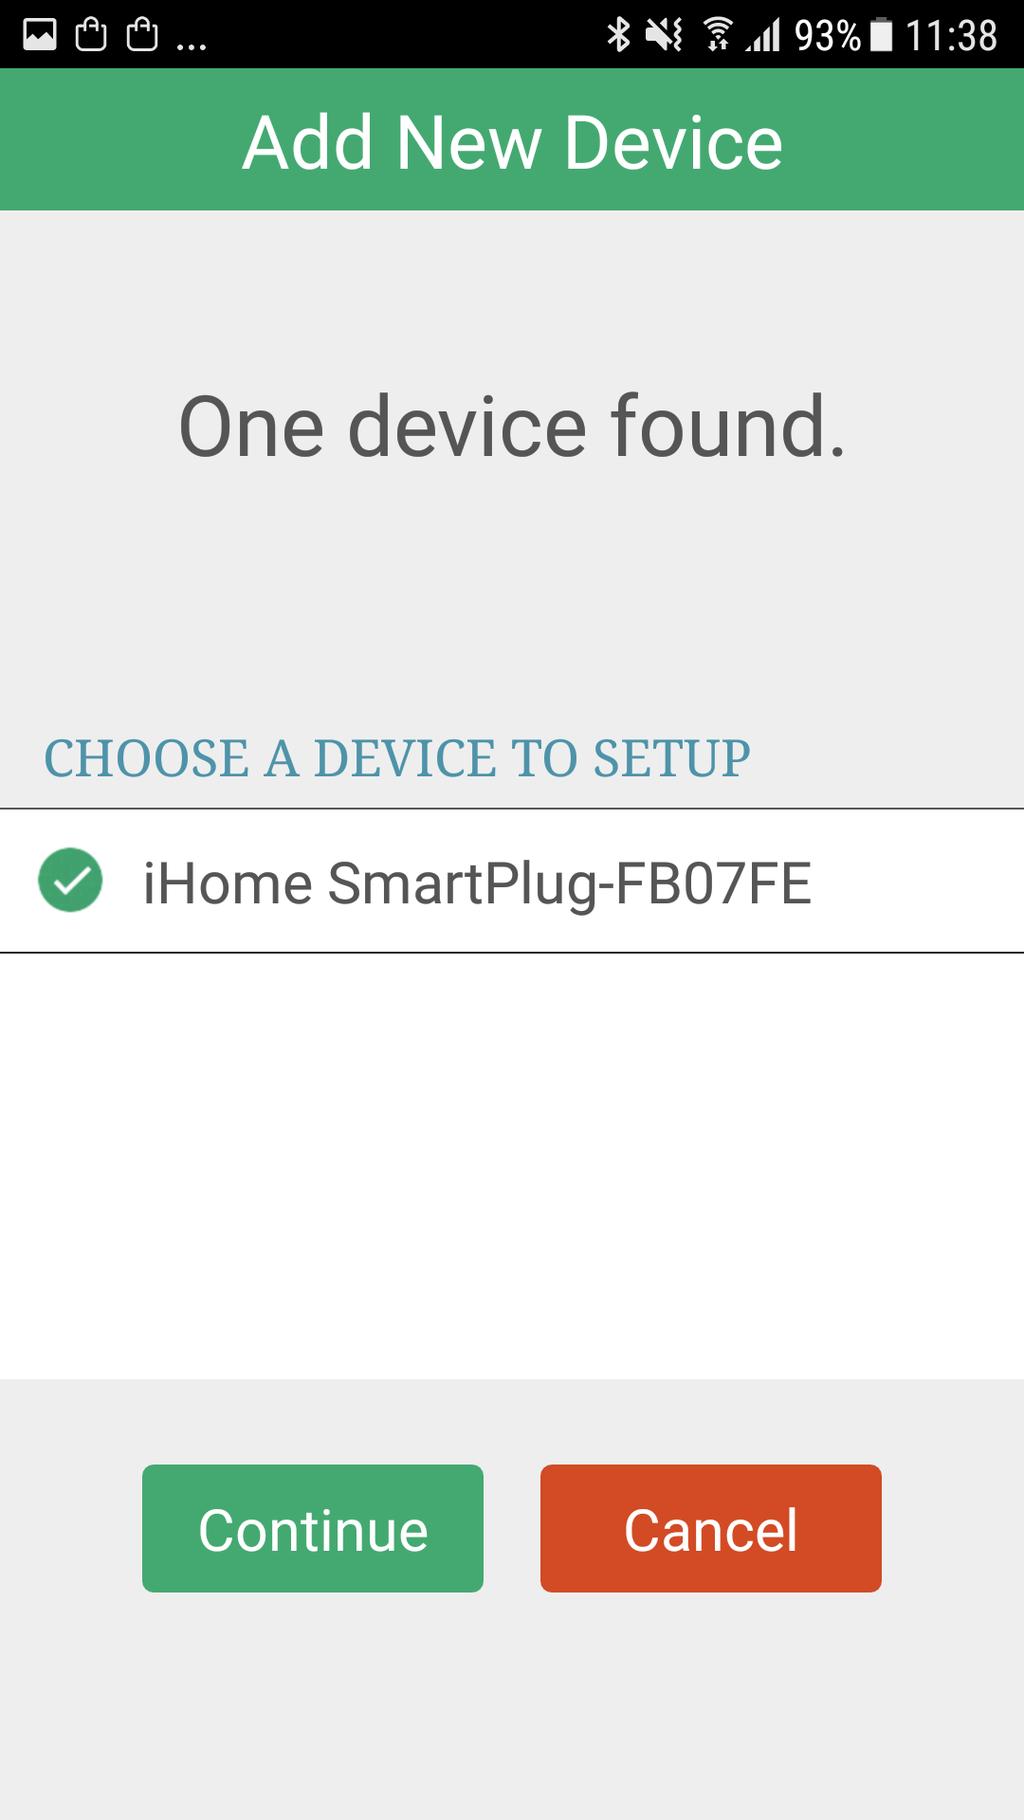 Select the ihome SmartPlug-xxxxxx and then tap CONTINUE.